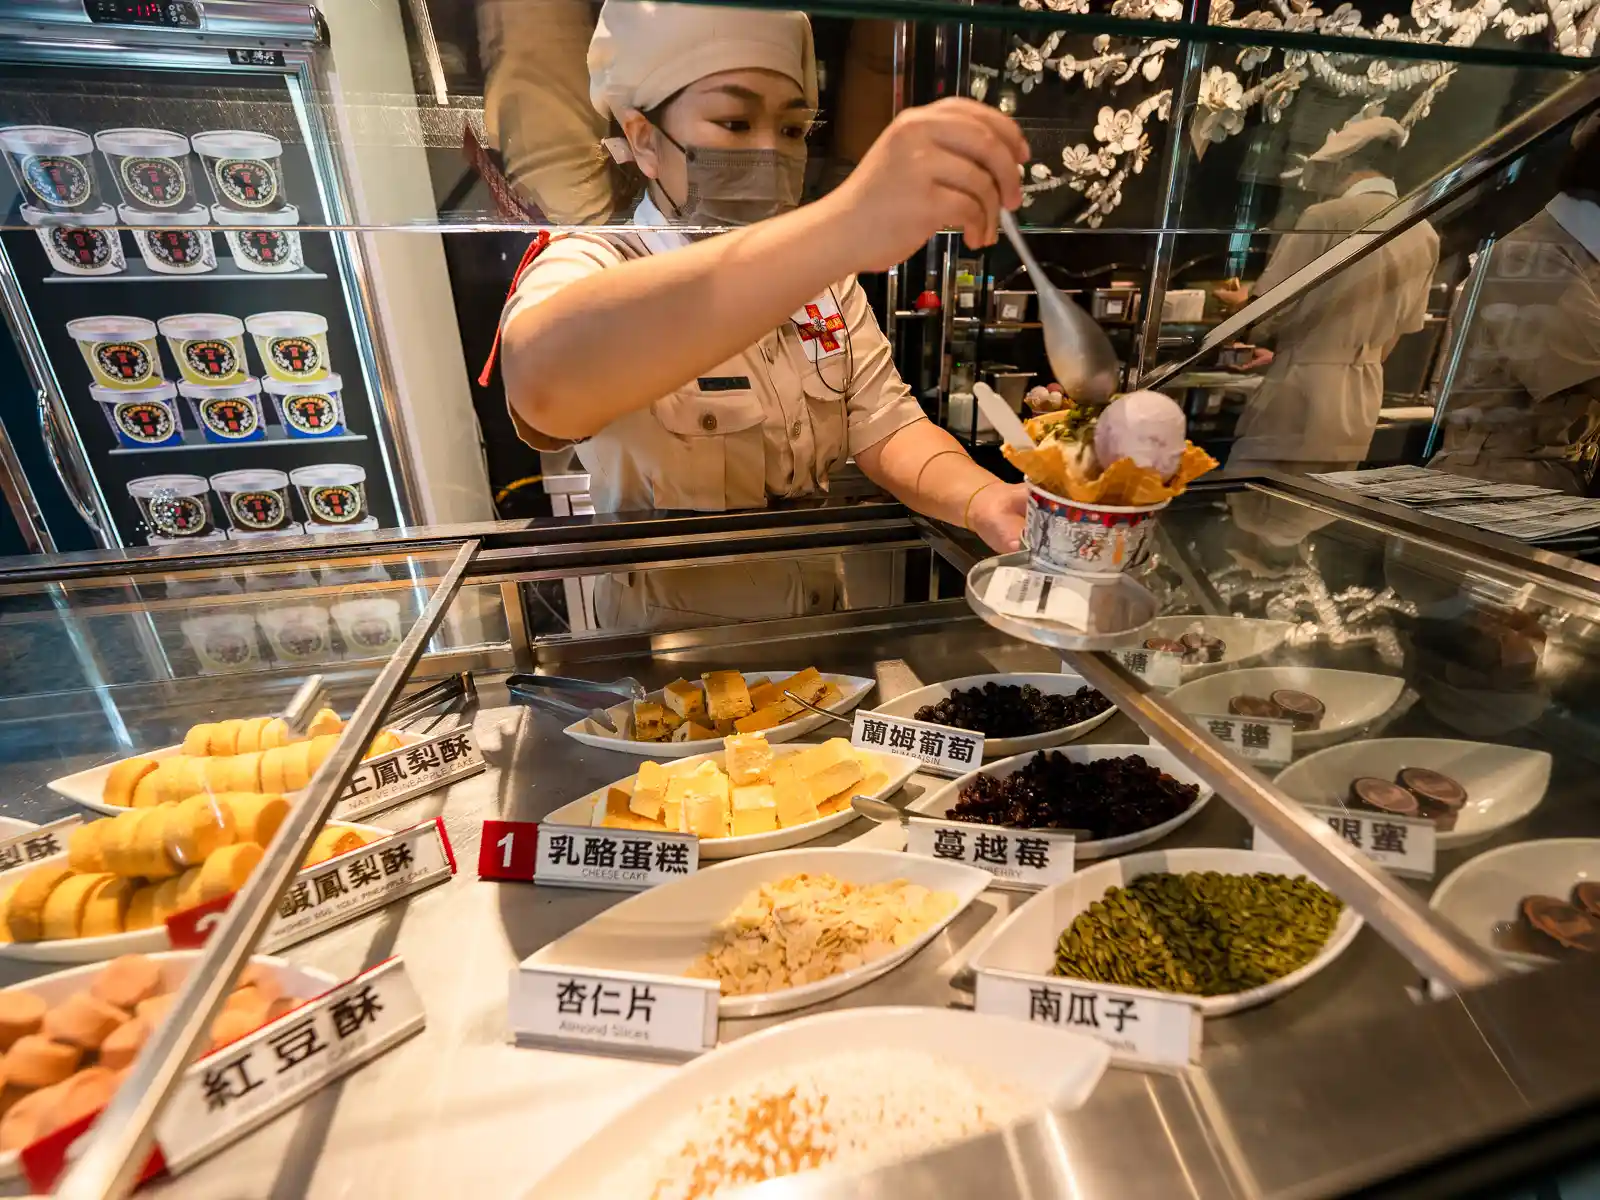 An employee adds toppings to an order of ice cream.